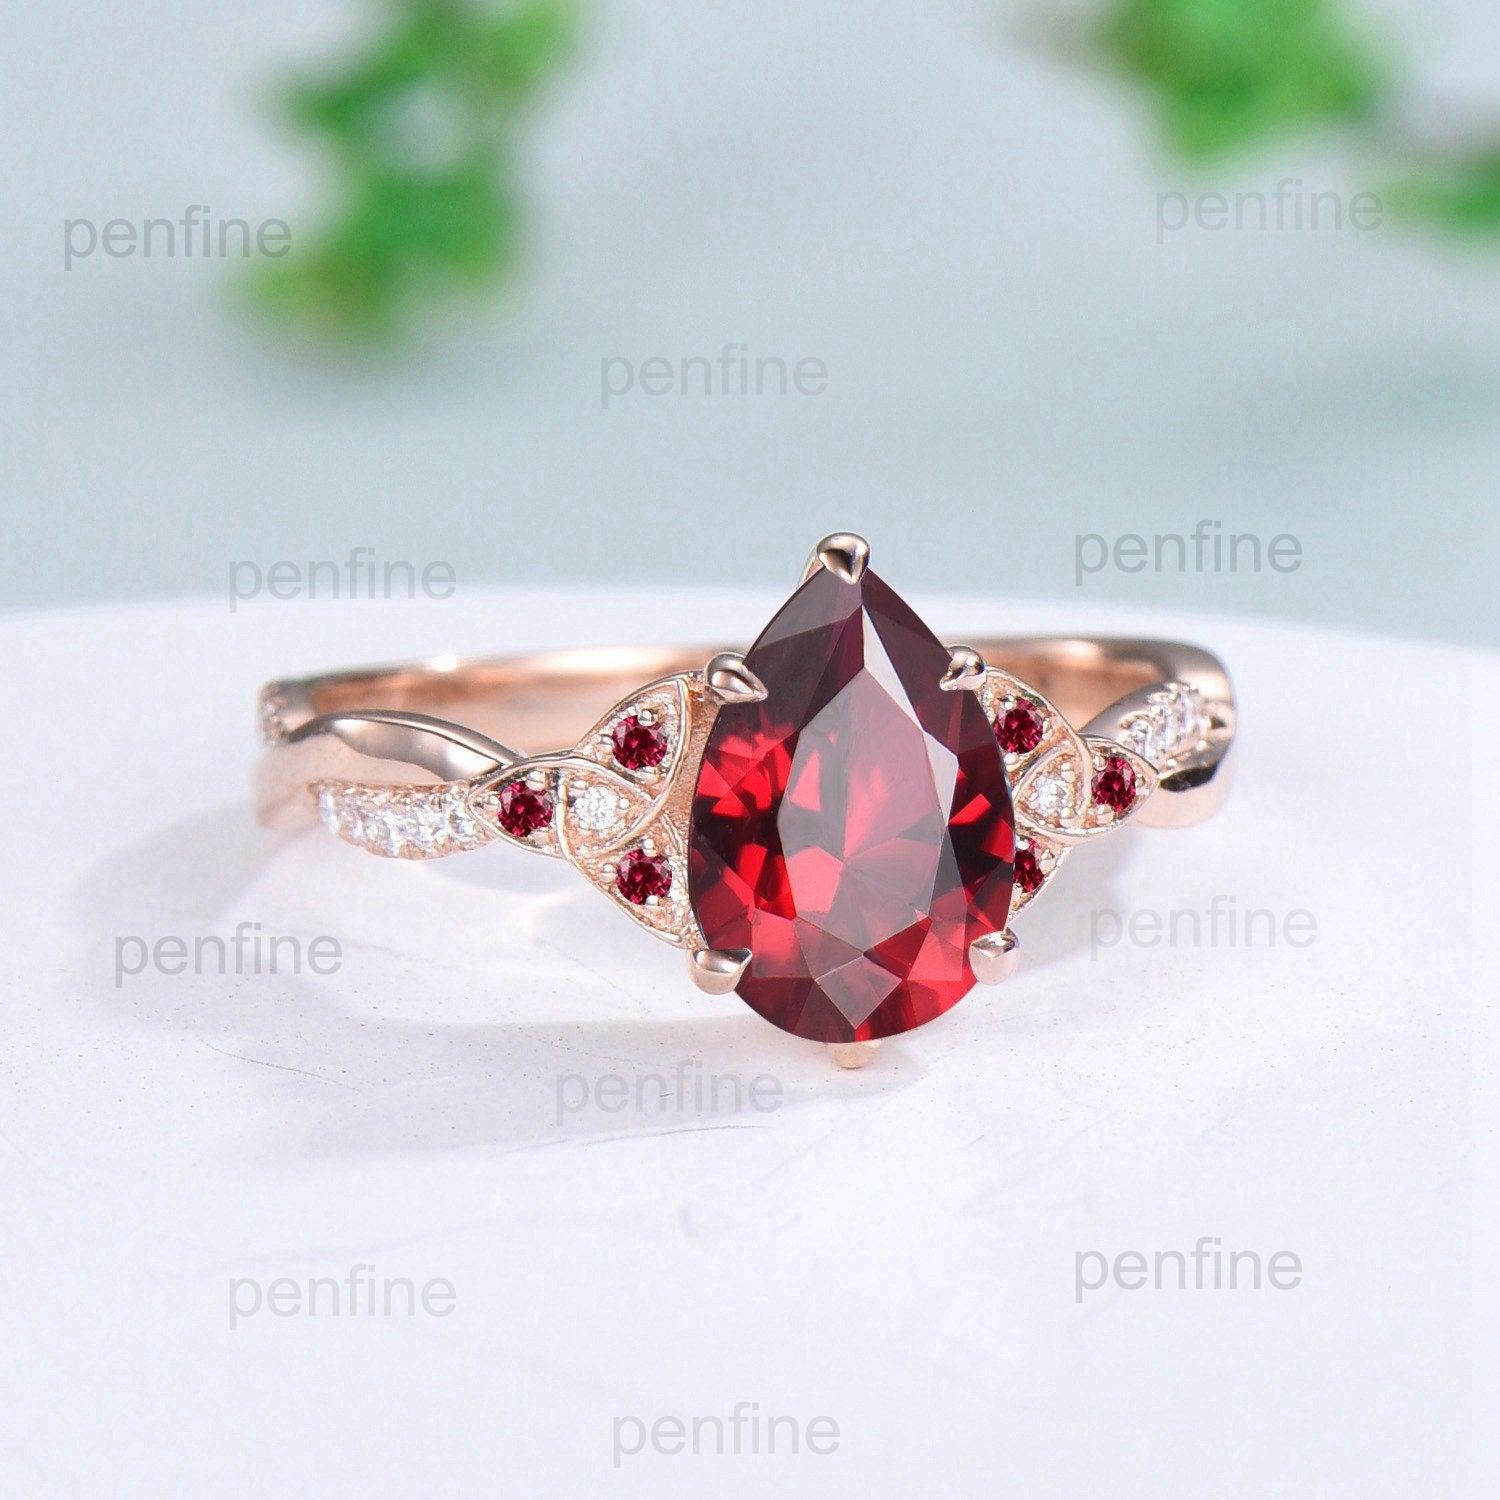 1.25 Carat Pear Cut Ruby and Diamond Engagement Ring in 9k White Gold —  kisnagems.co.uk